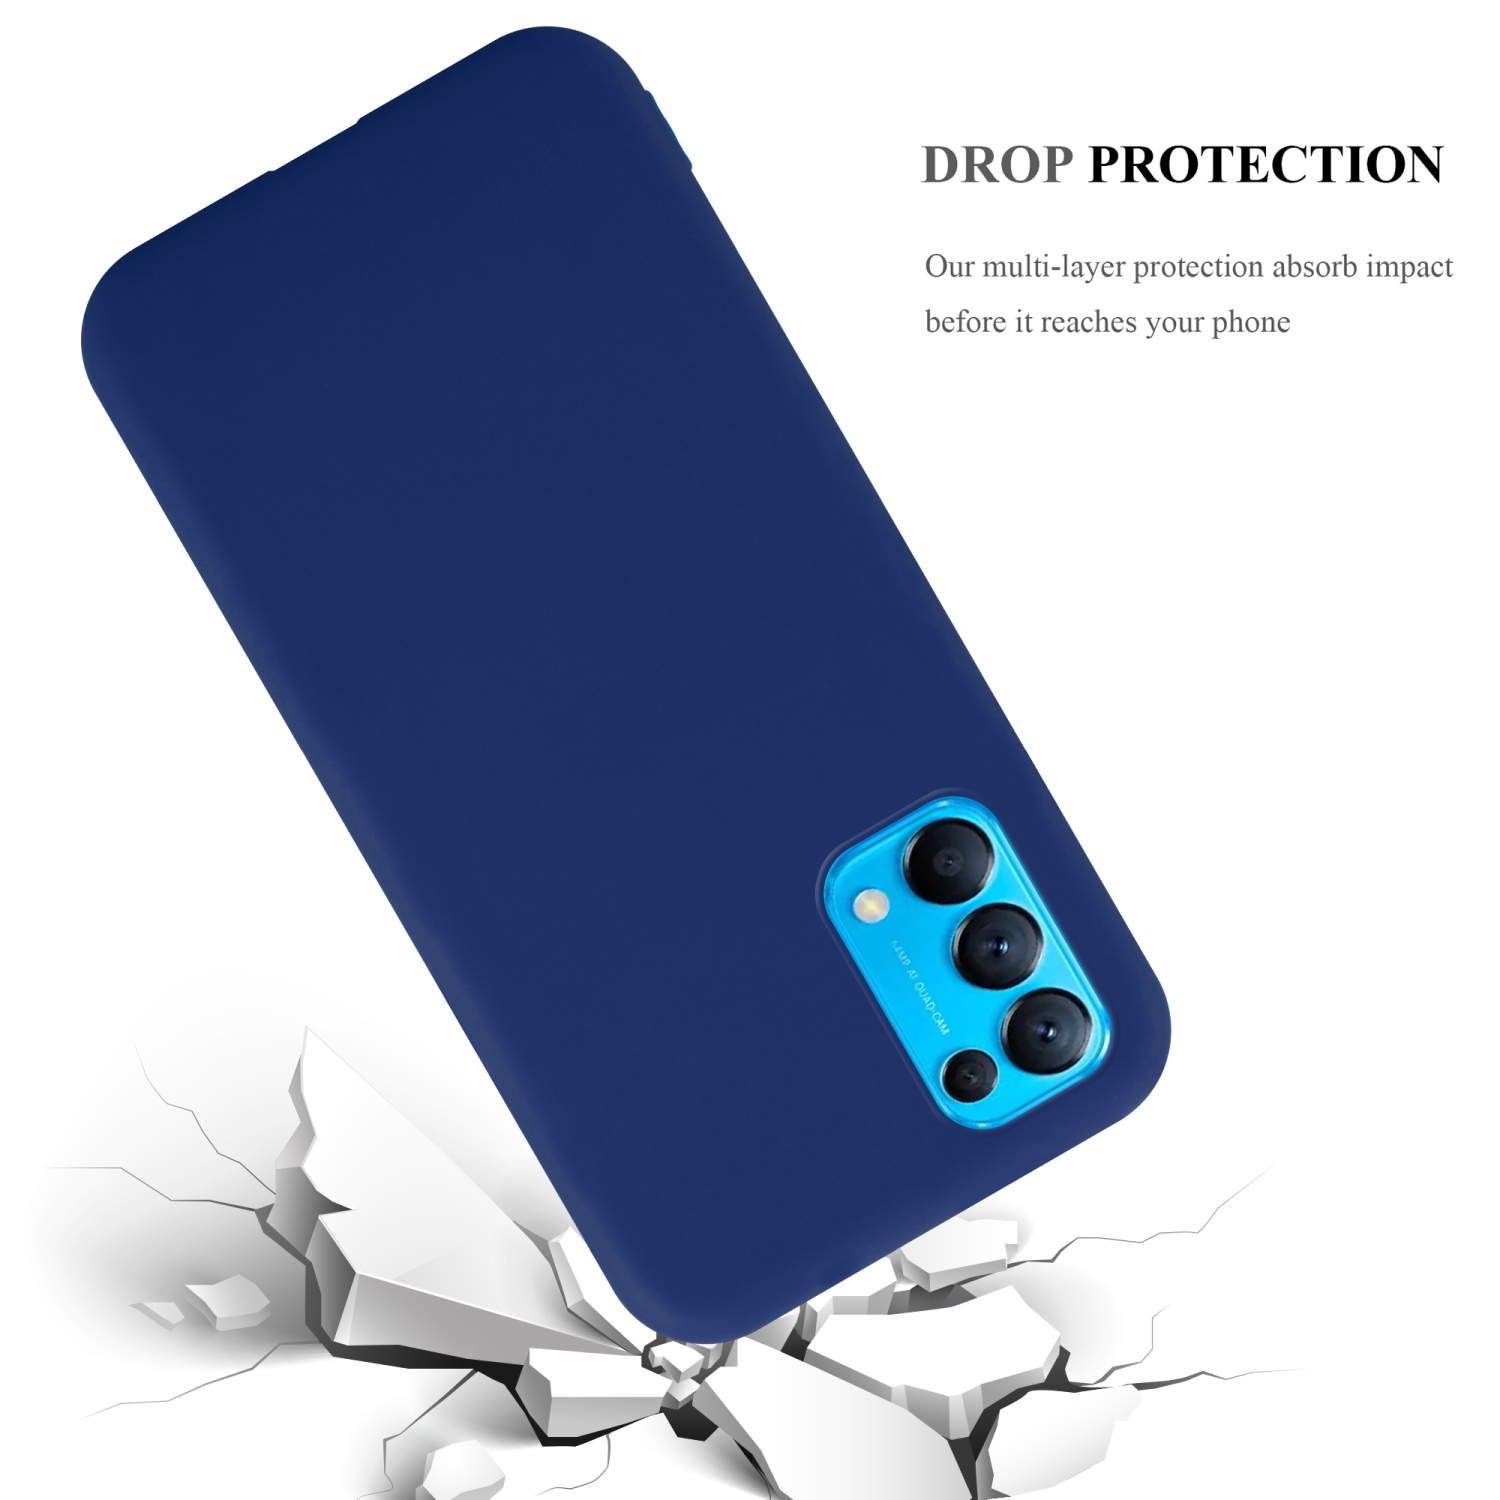 FIND Hülle Oppo, CADORABO DUNKEL TPU Backcover, Candy im BLAU CANDY LITE, X3 Style,